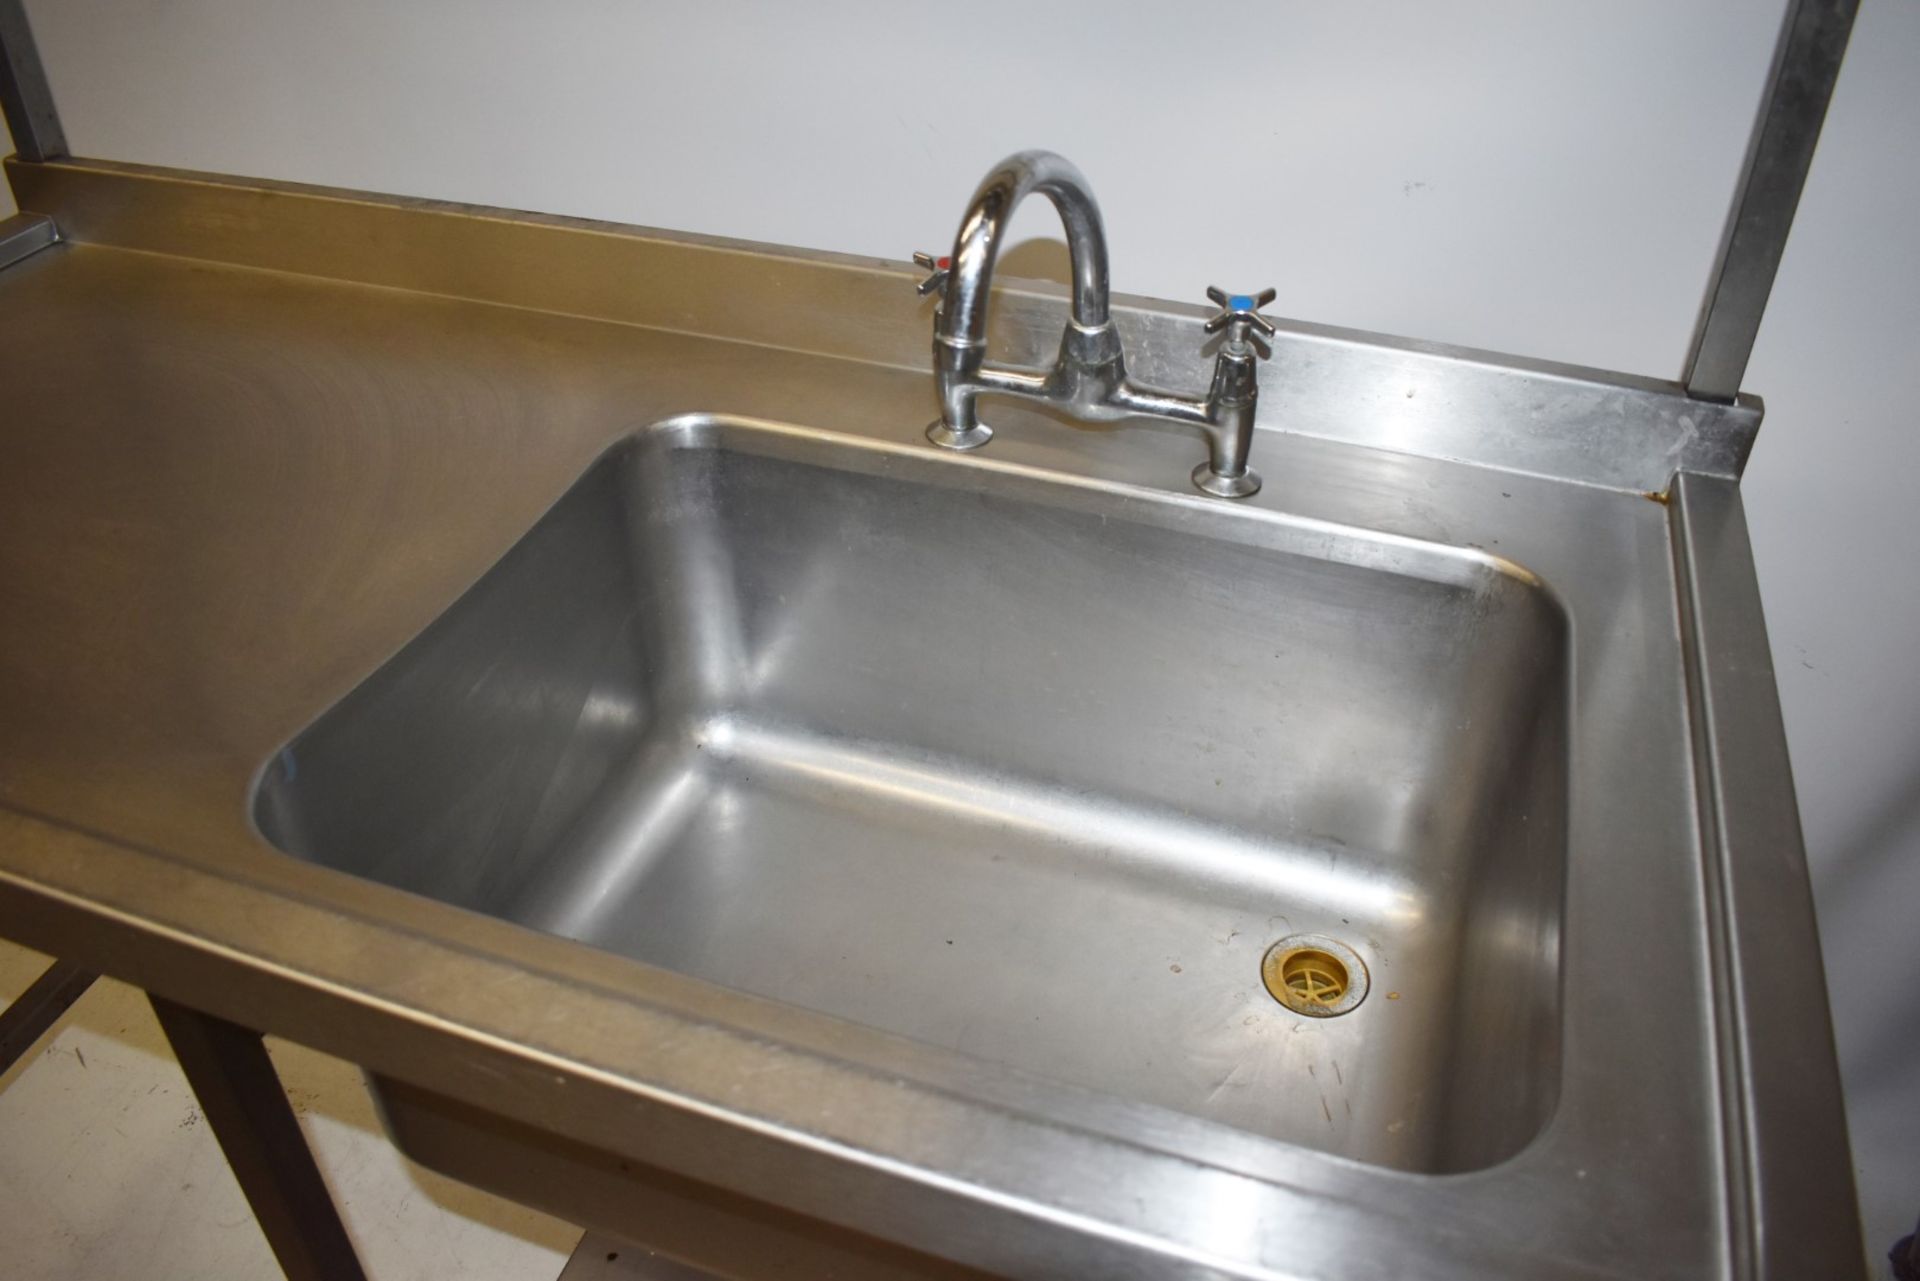 1 x Stainless Steel Sink Basin Wash Stand Unit - Right Hand Sink Basin With Mixer Taps, Drip Proof - Image 6 of 9